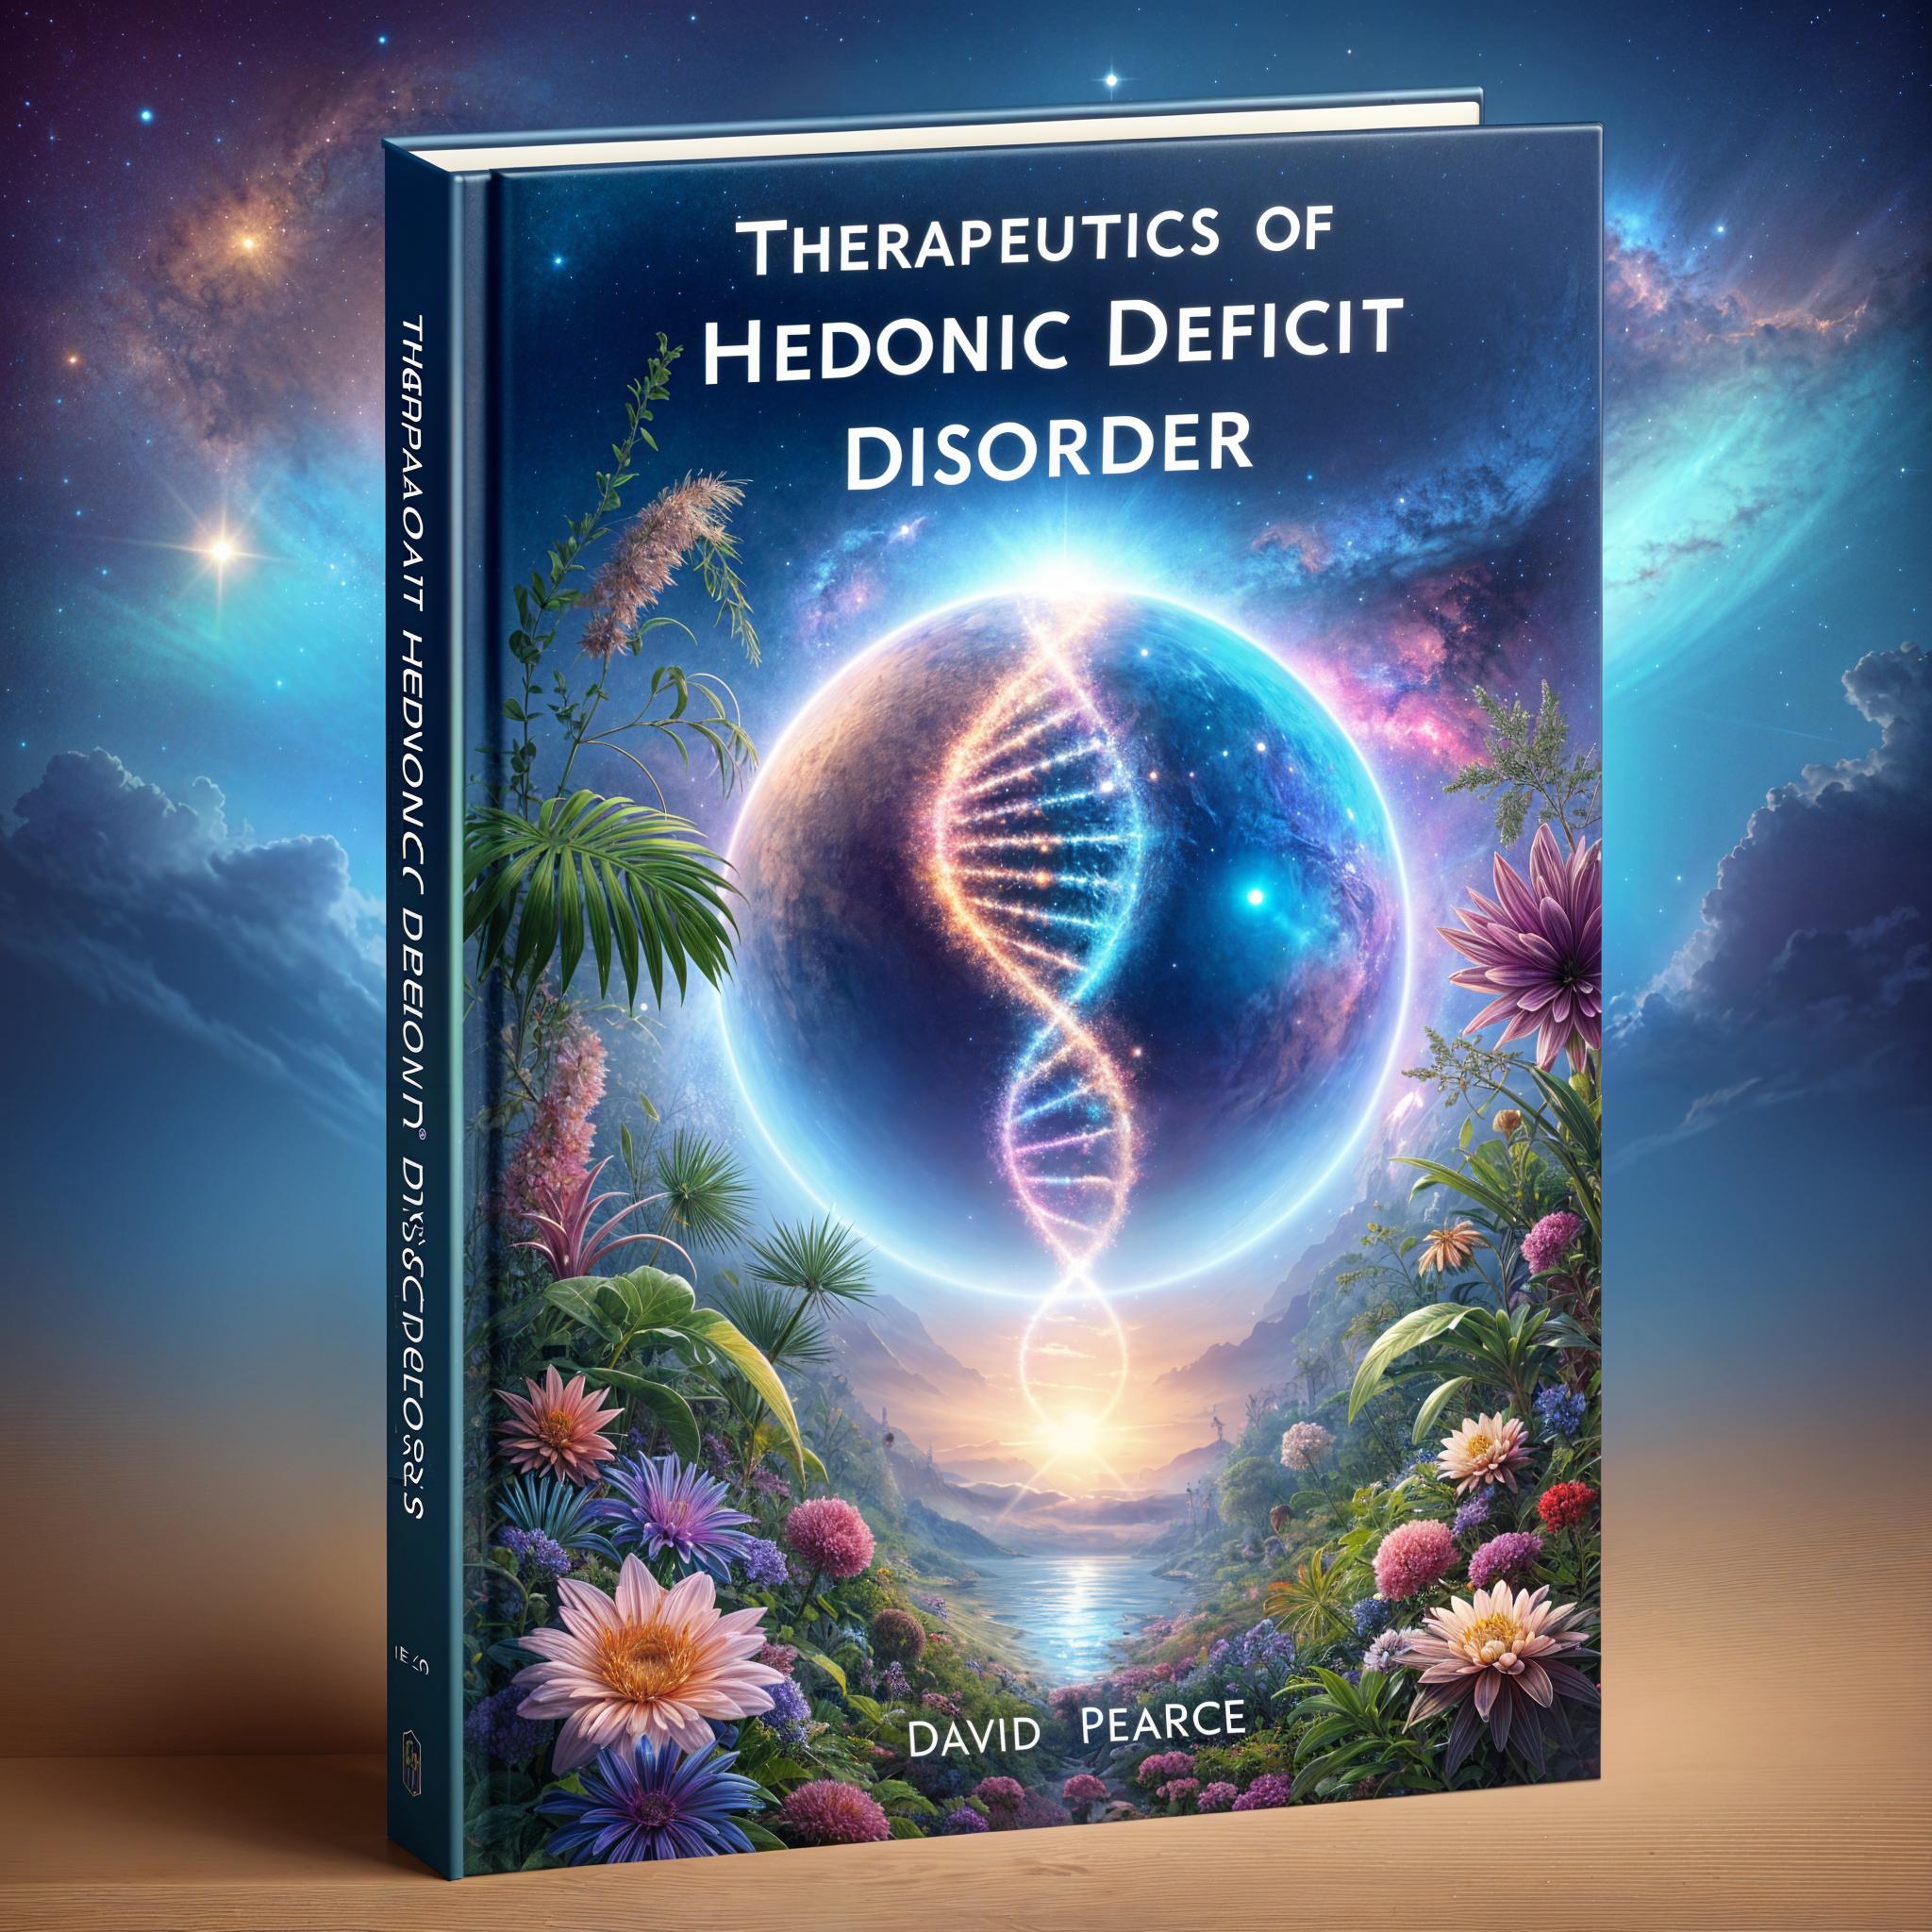 Therapeutics of Hedonic Deficit Disorder by David Pearce